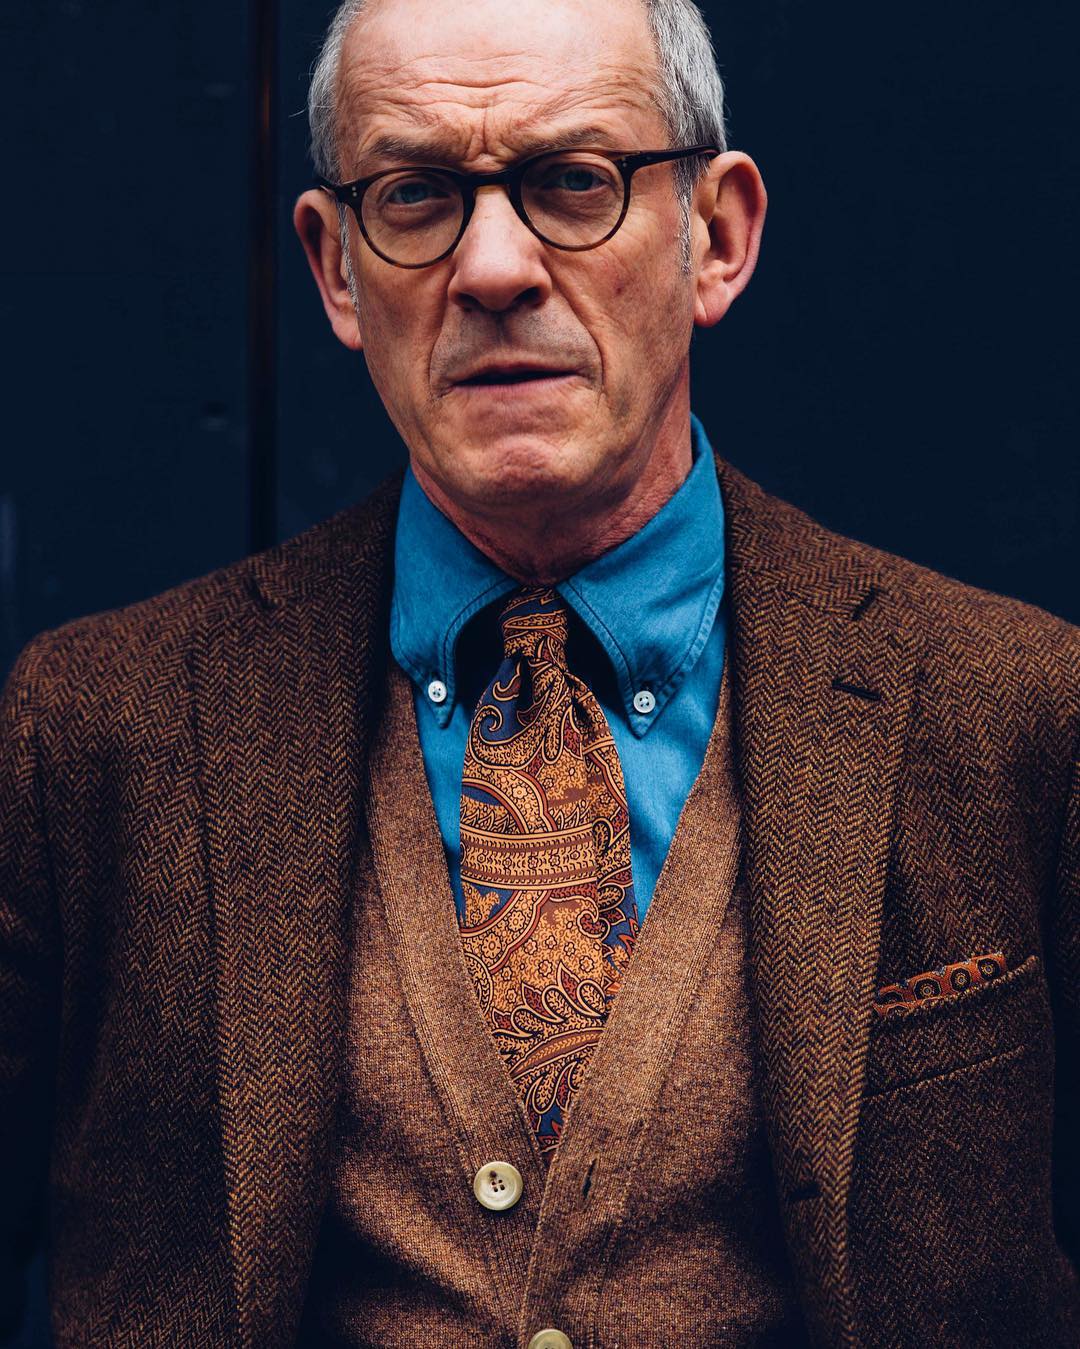 Serious looking man with blue shirt and brown suit jacket wearing round tortoise spectacle frames